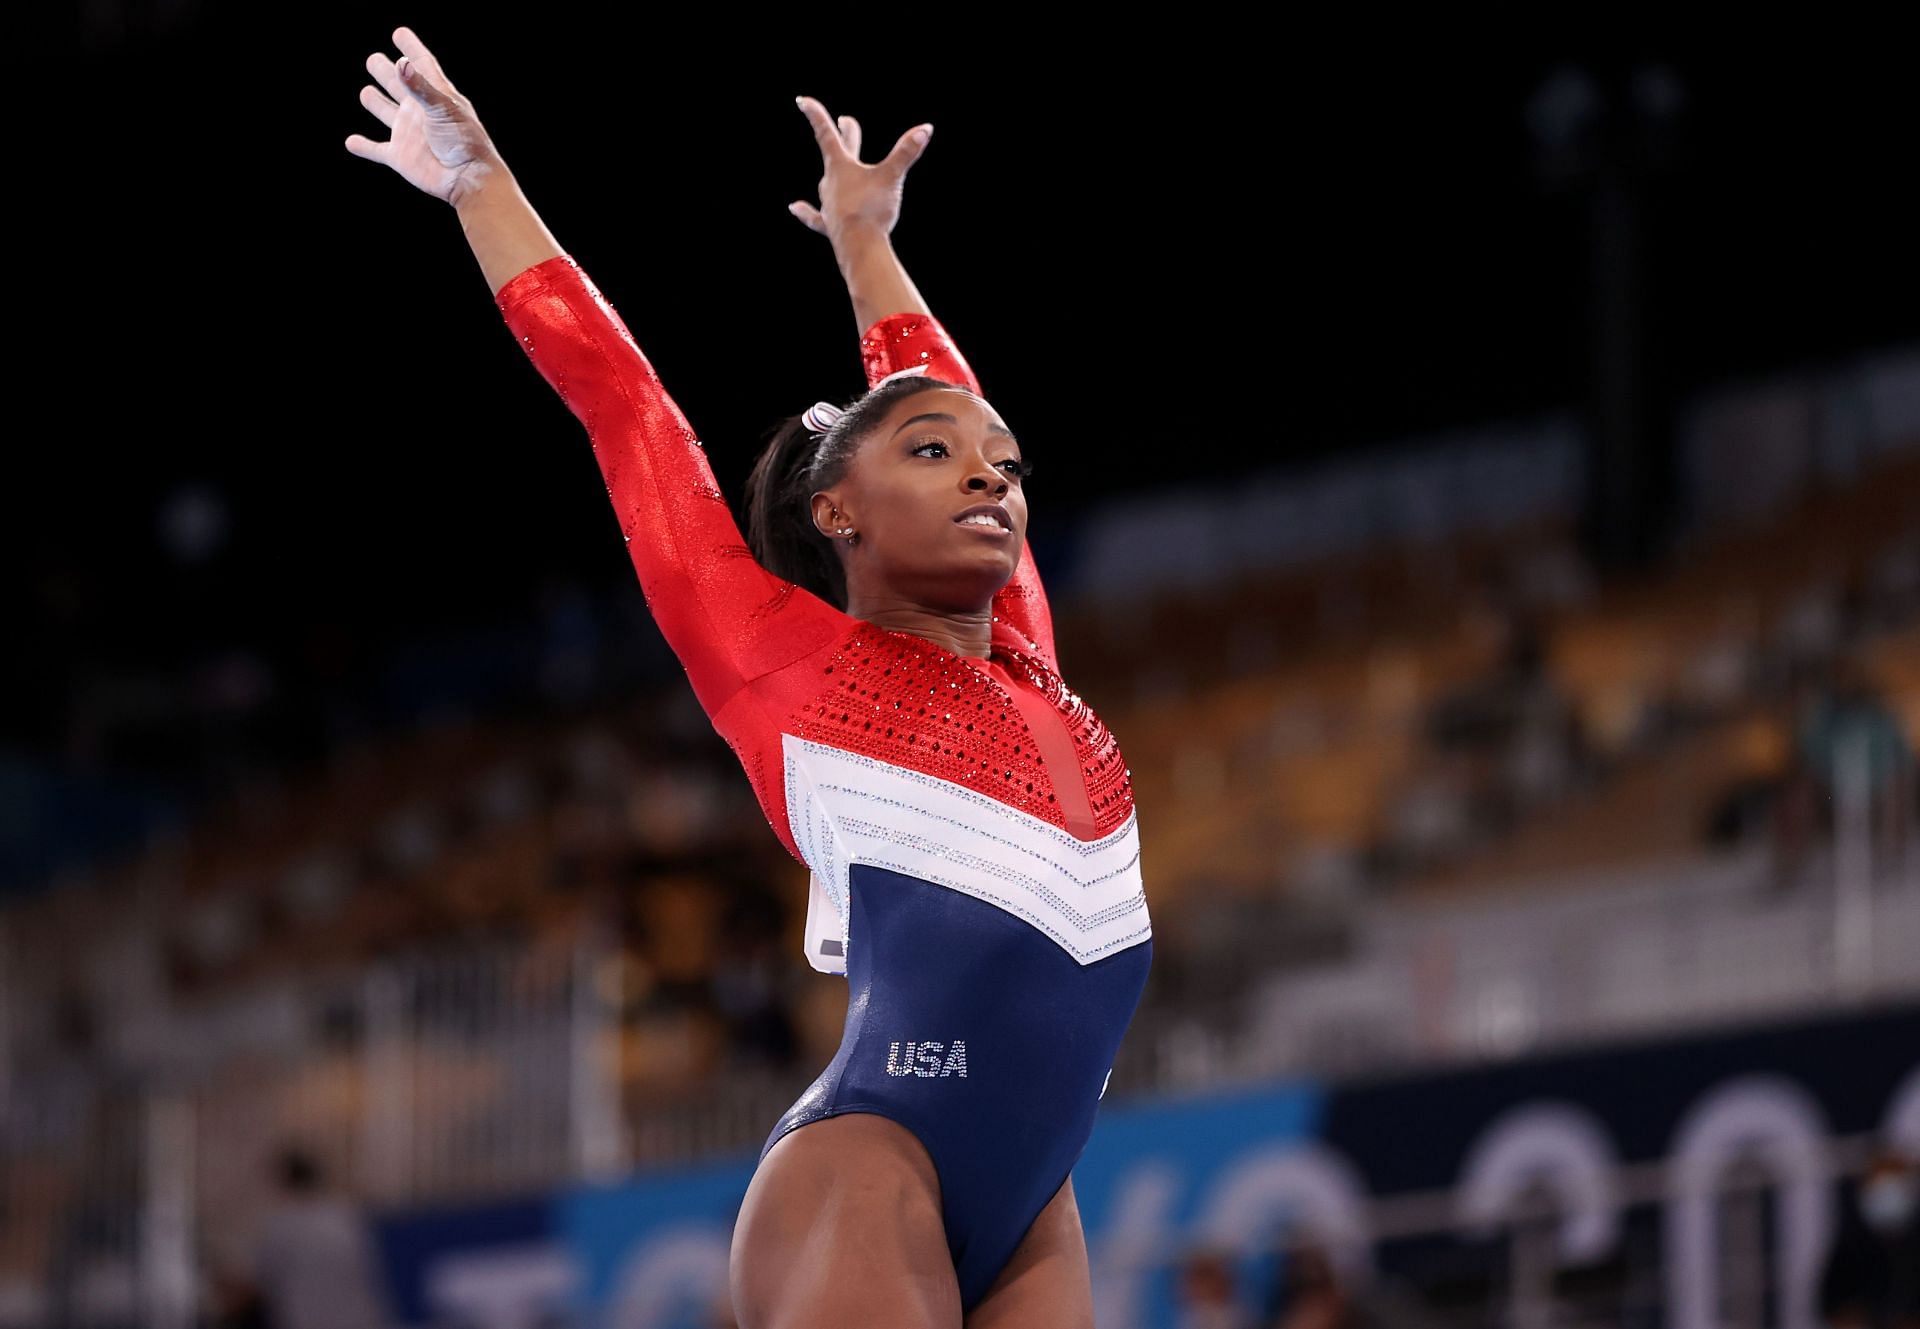 Simone Biles during the 2020 Olympics at Tokyo